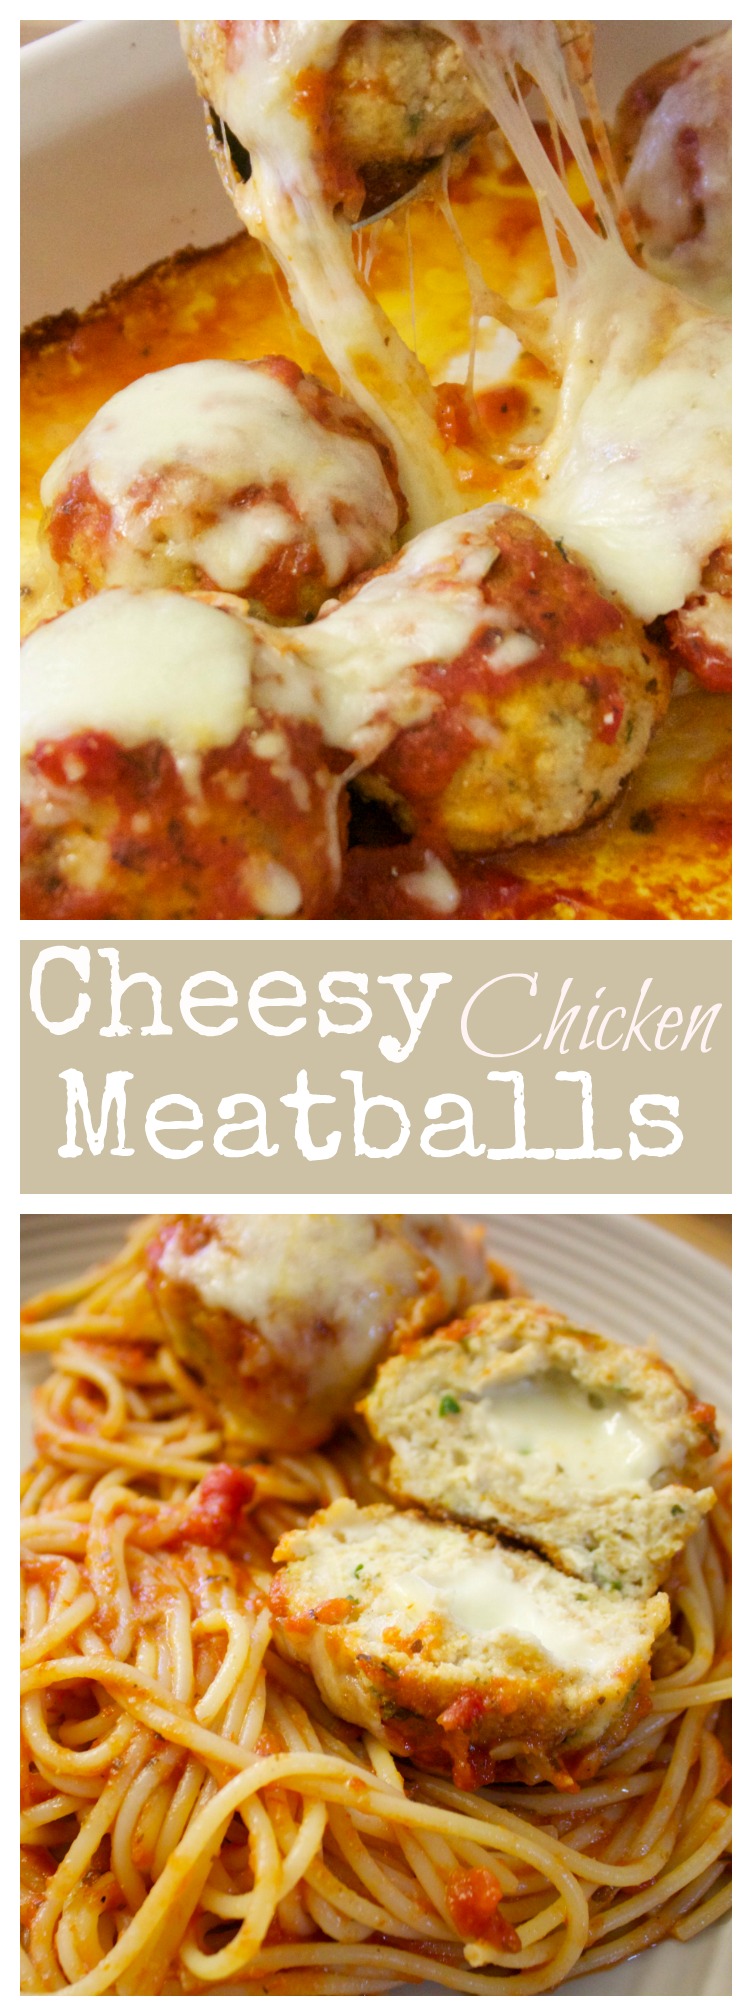 Cheesy Chicken Meatballs Recipe | Video and Recipe from Cooked by Julie